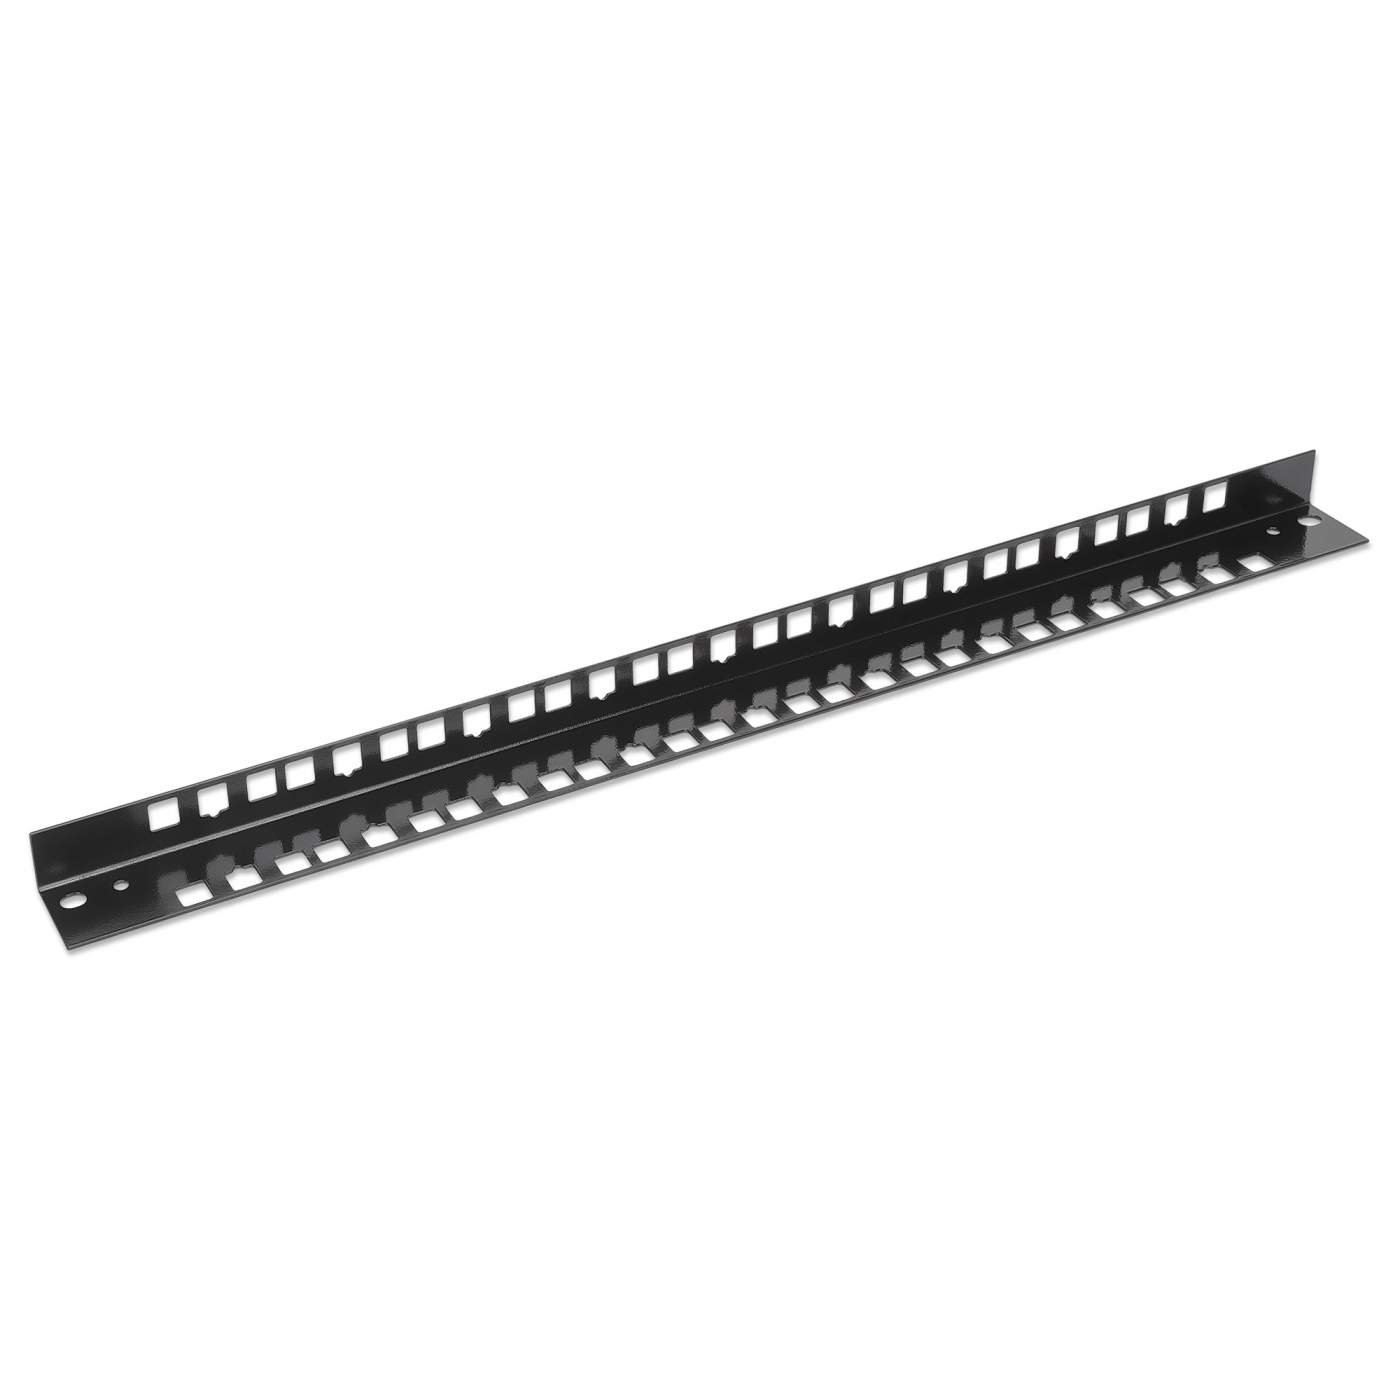 Spare Rails for 19" Wallmount Cabinets, 9U Image 2